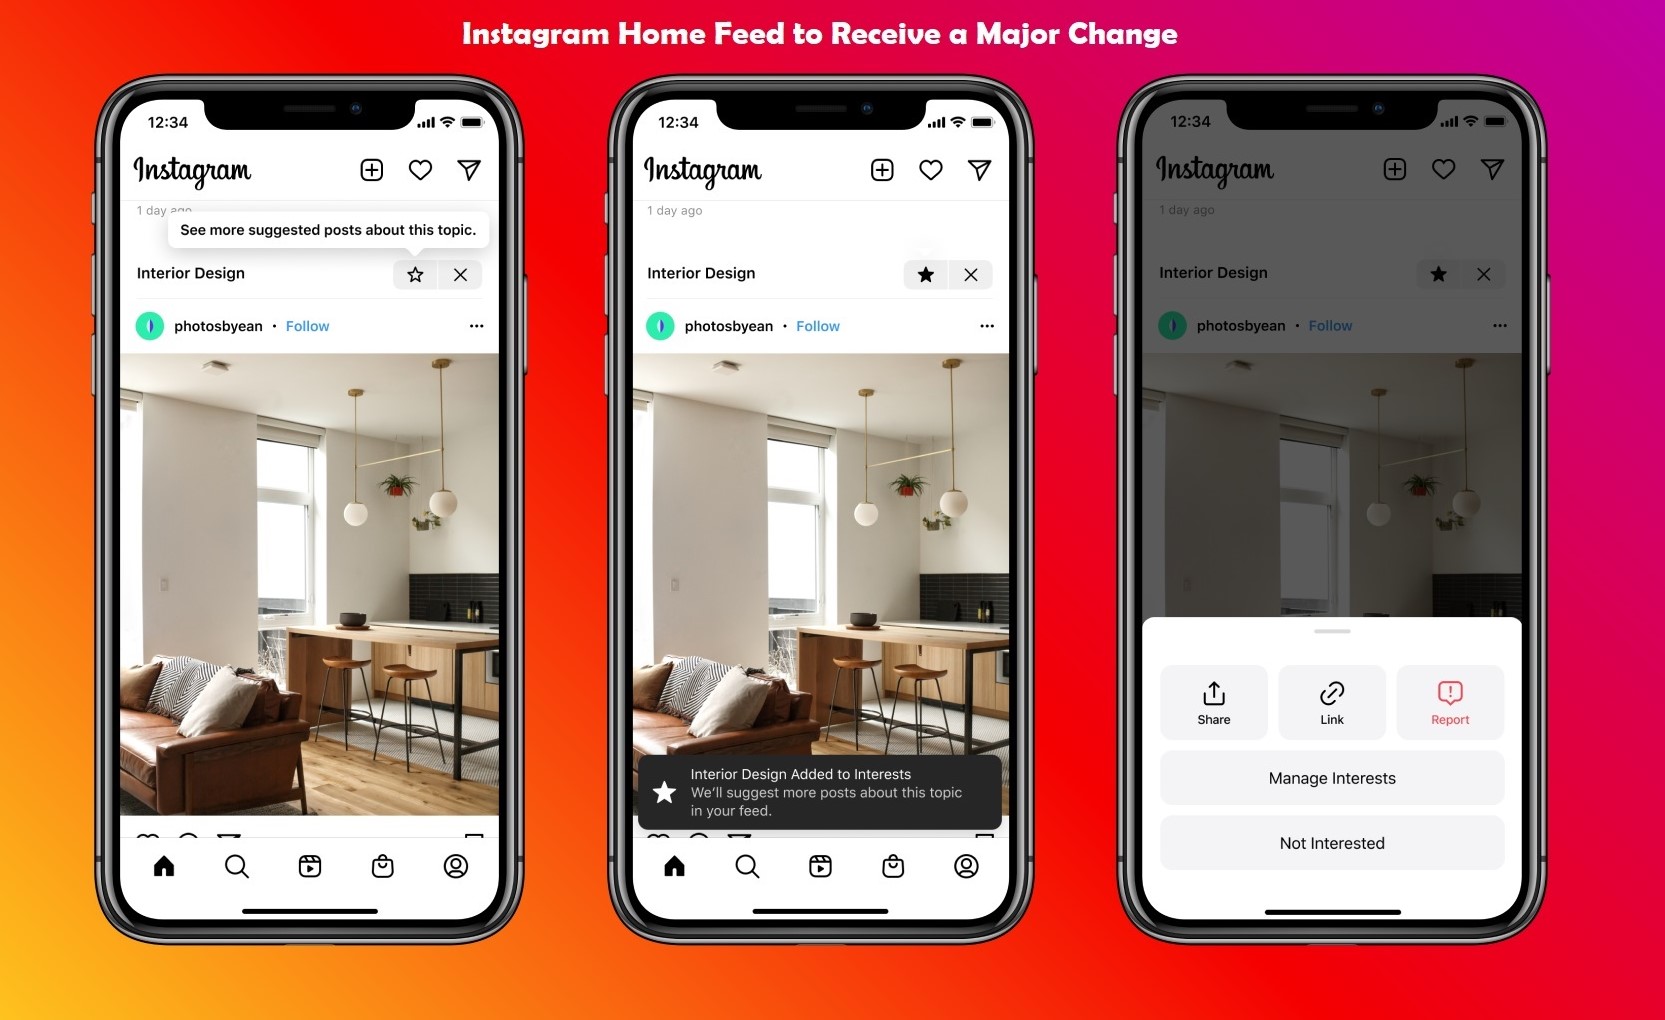 Instagram Home Feed to Receive a Major Change